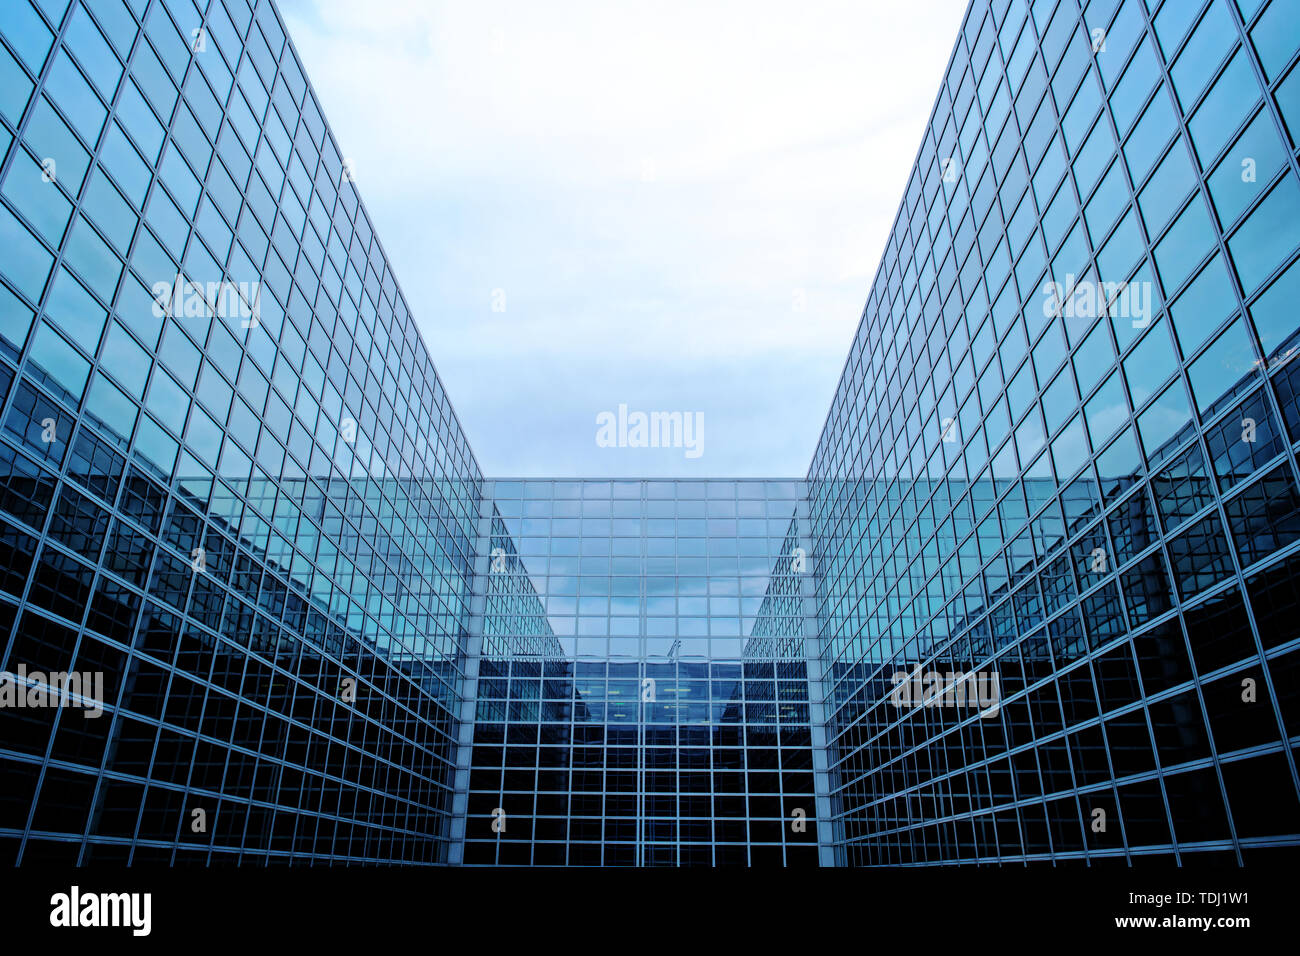 Modern futuristic business building with glass facade. Stock Photo